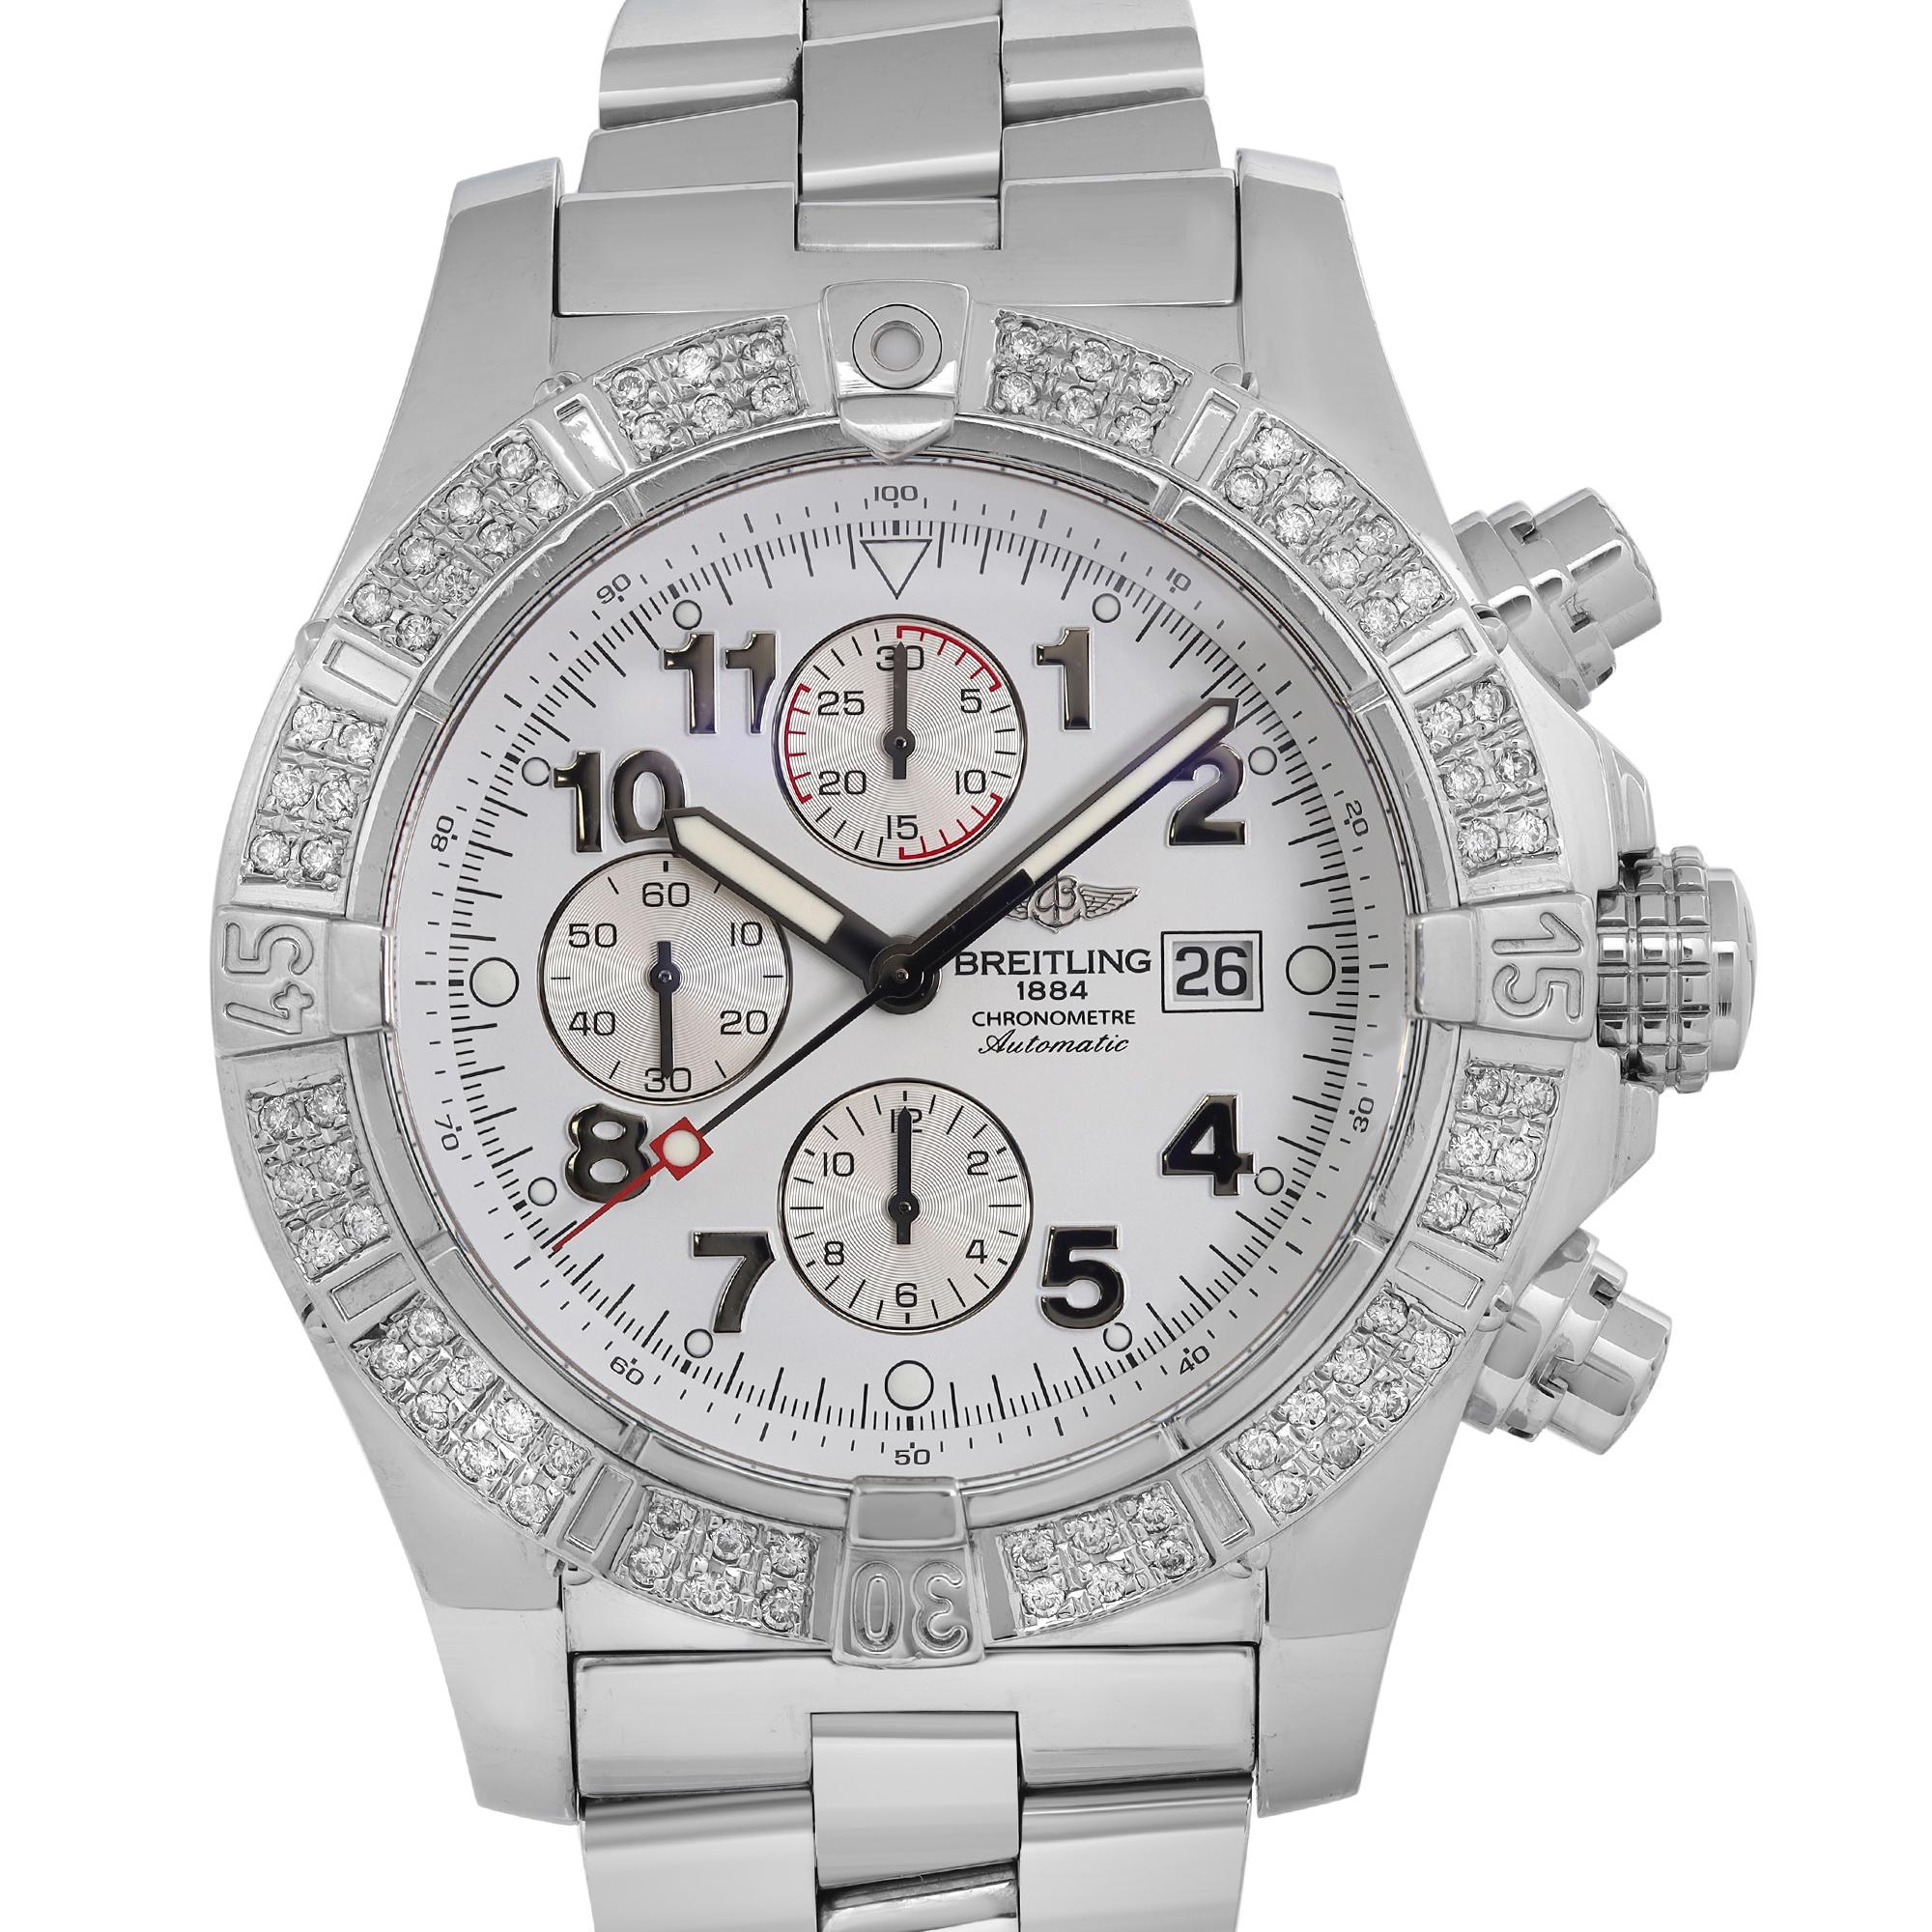 Custom Diamond Bezel. Minor scratches on the back case.

 Brand: Breitling  Type: Wristwatch  Department: Men  Model Number: A13370  Country/Region of Manufacture: Switzerland  Style: Luxury  Model: Breitling Super Avenger  Vintage: No  Movement: